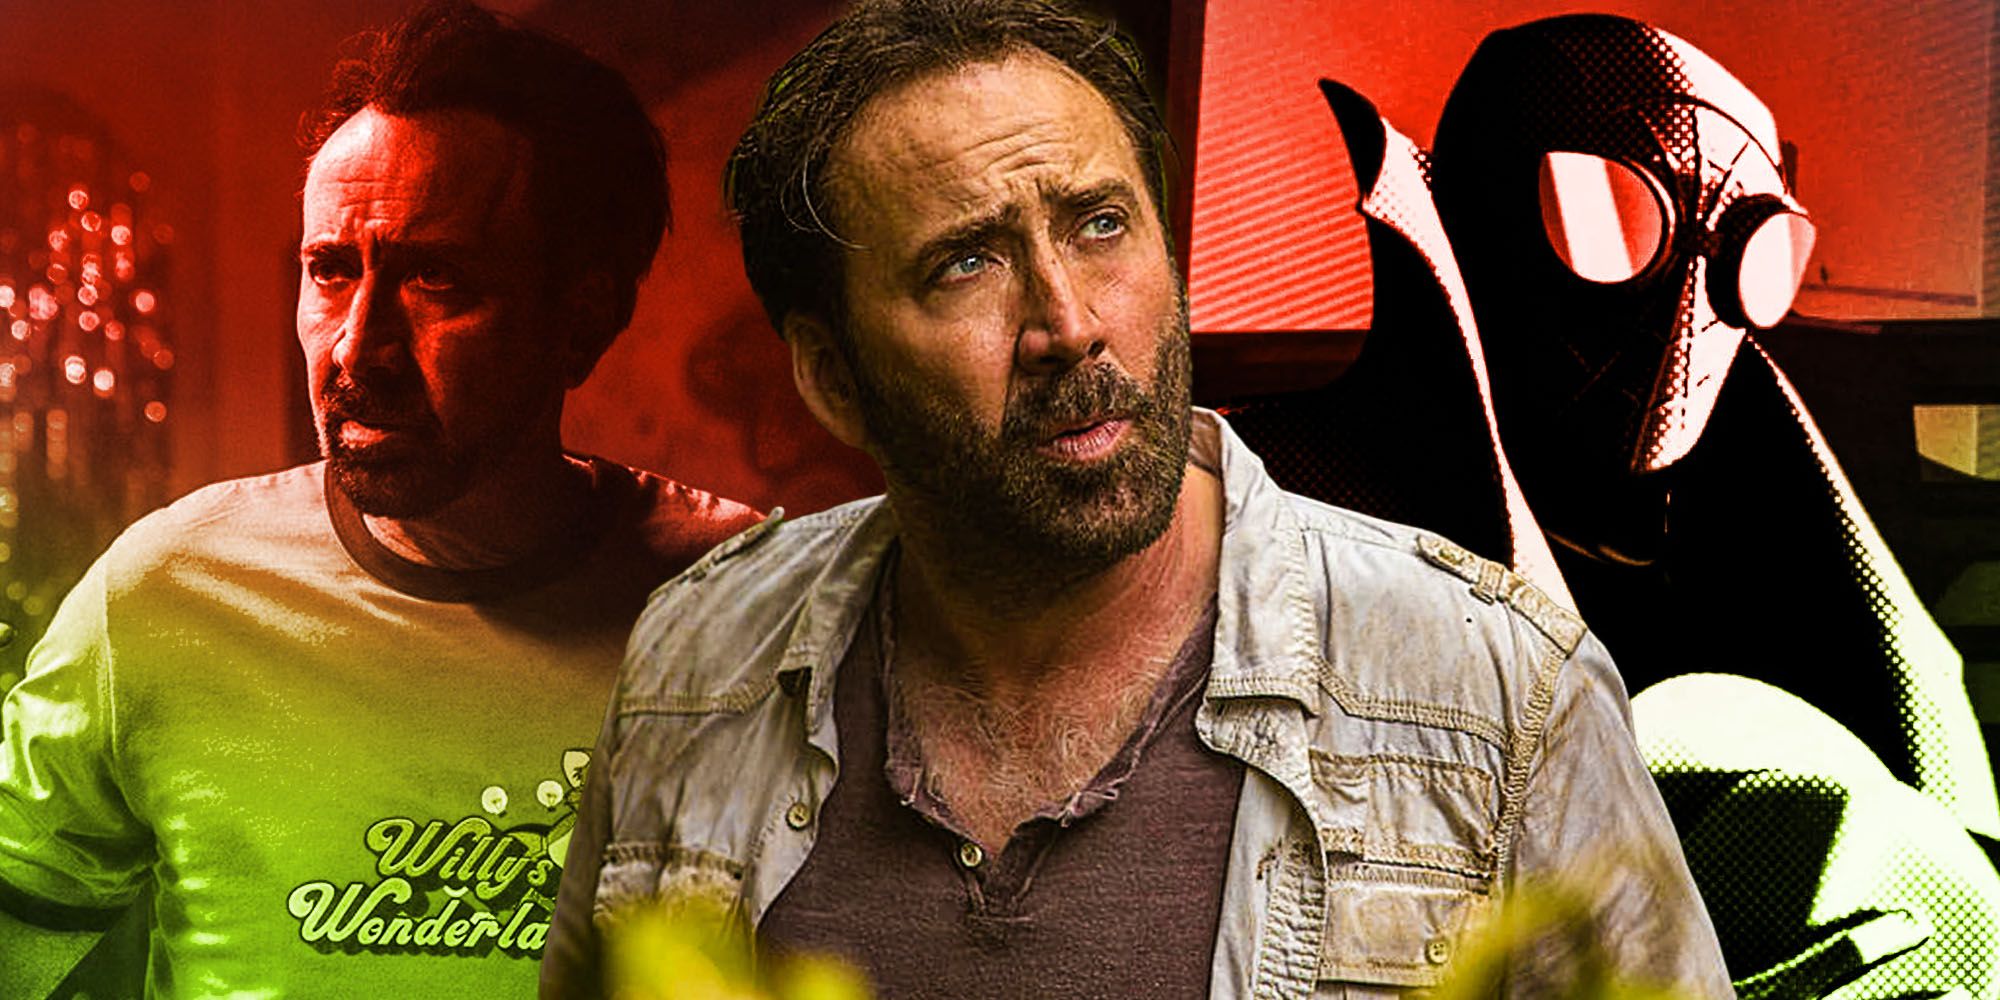 Nicolas Cage Willys wonderland into the spiderverse The Unbearable Weight of Massive Talent